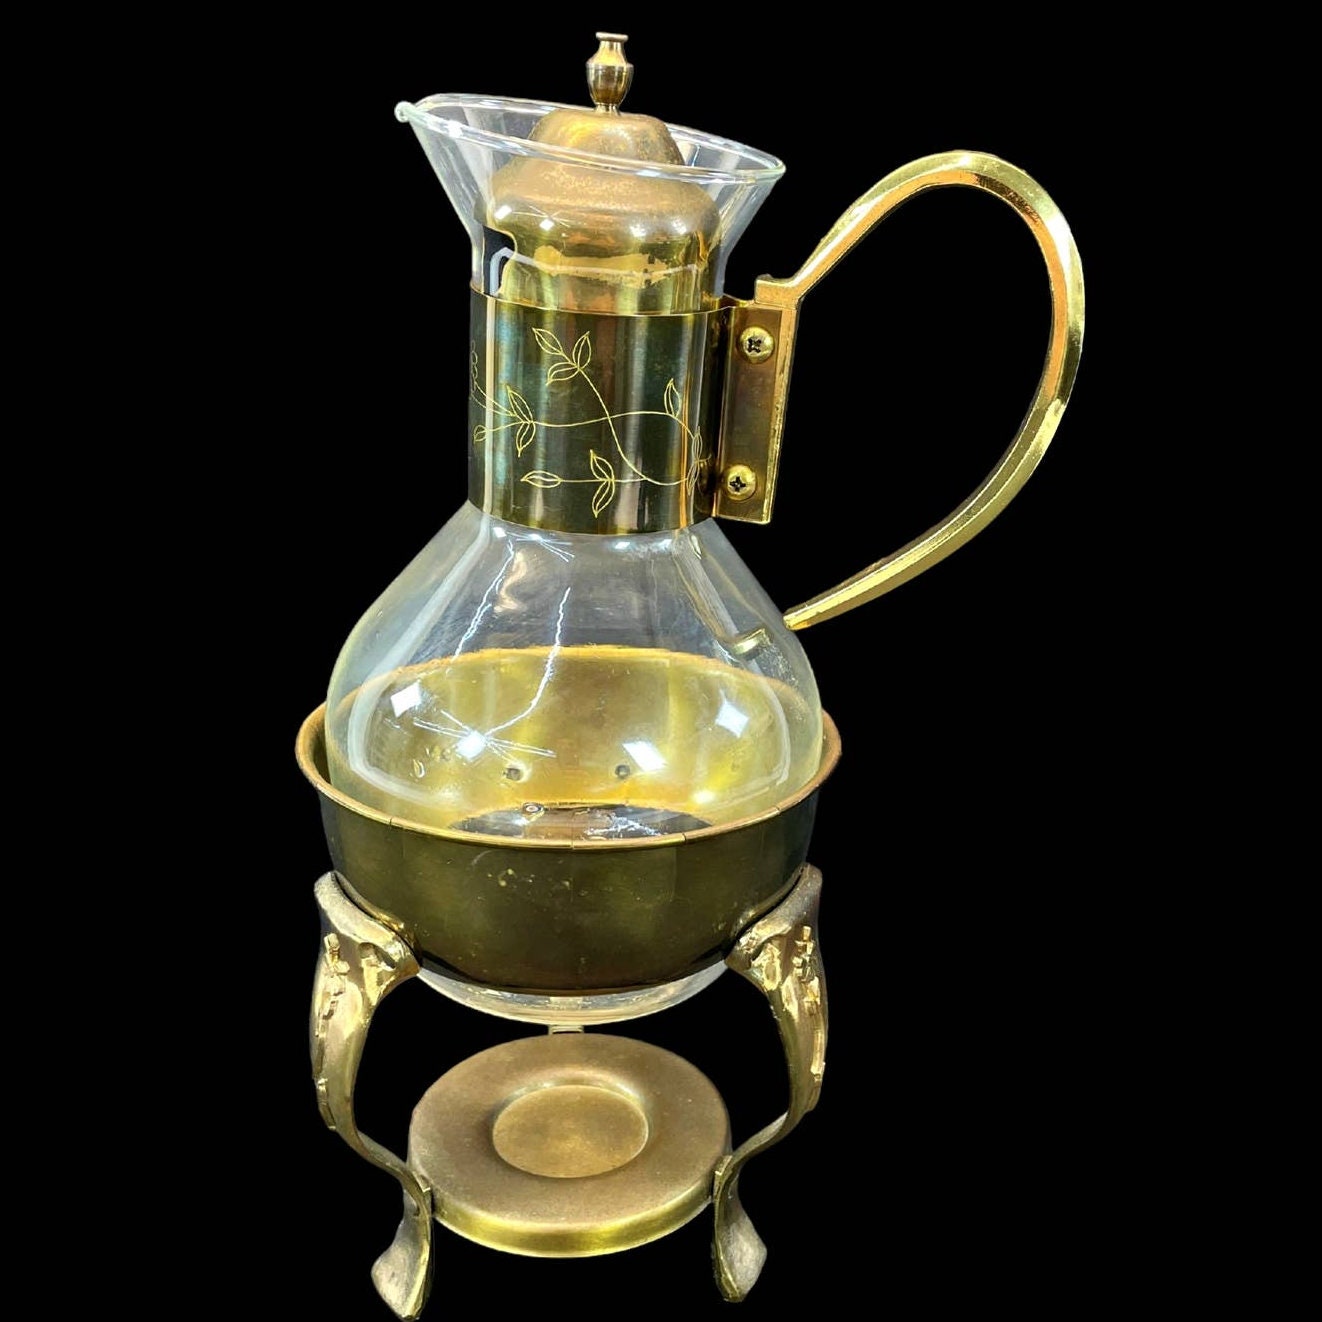 Vintage Brass and Glass Coffee Tea Carafe Pitcher Tea Pot With Warmer Stand